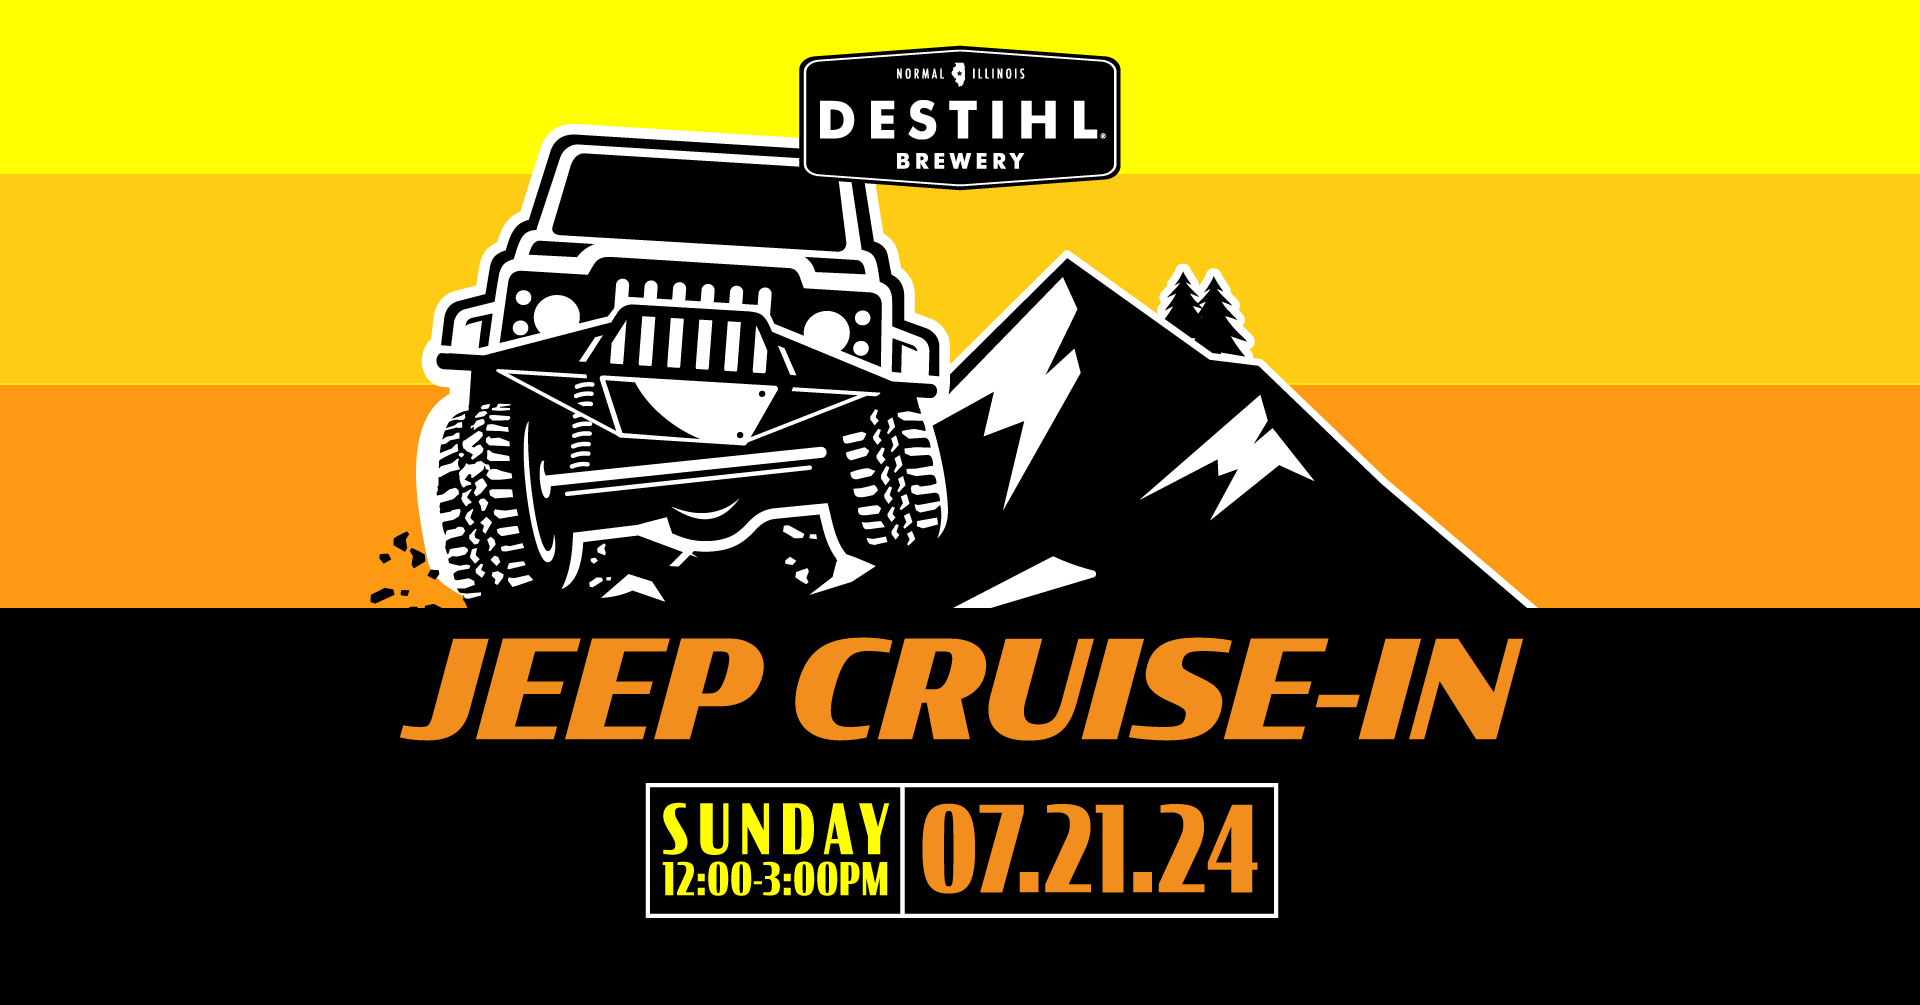 Jeep Cruise-In